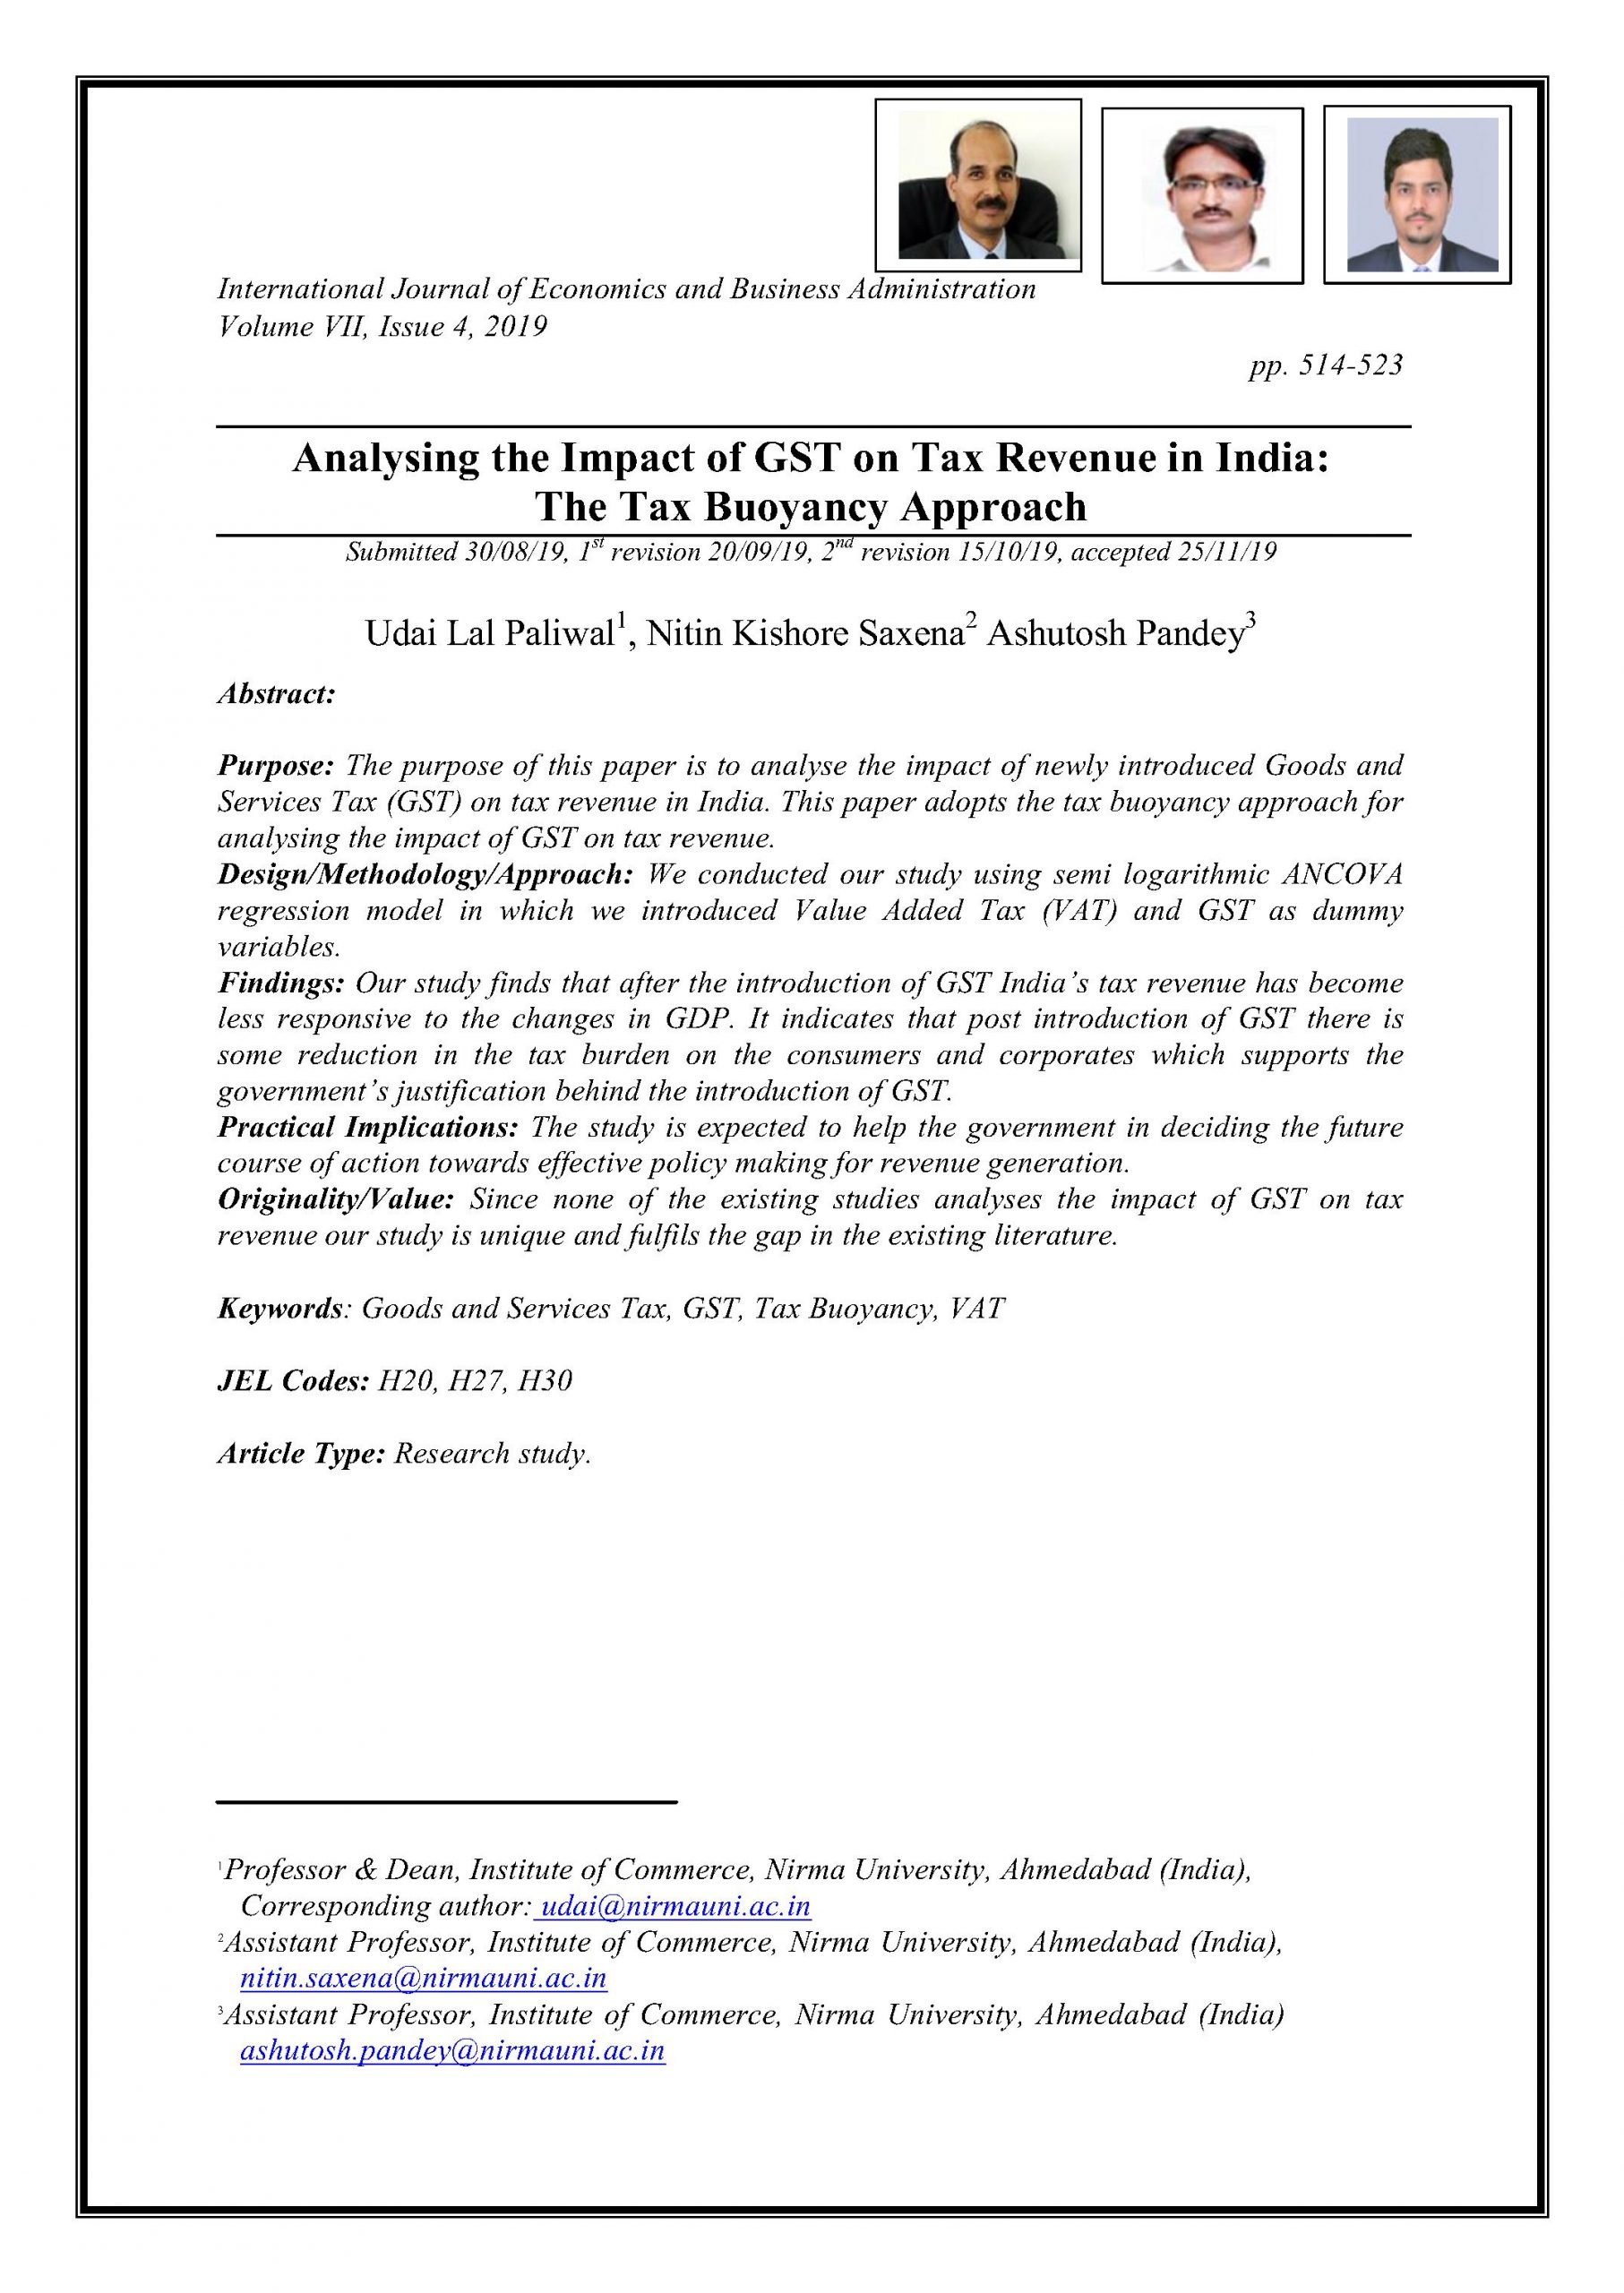 Analysing the Impact of GST on Tax Revenue in India: The Tax Buoyancy Approach